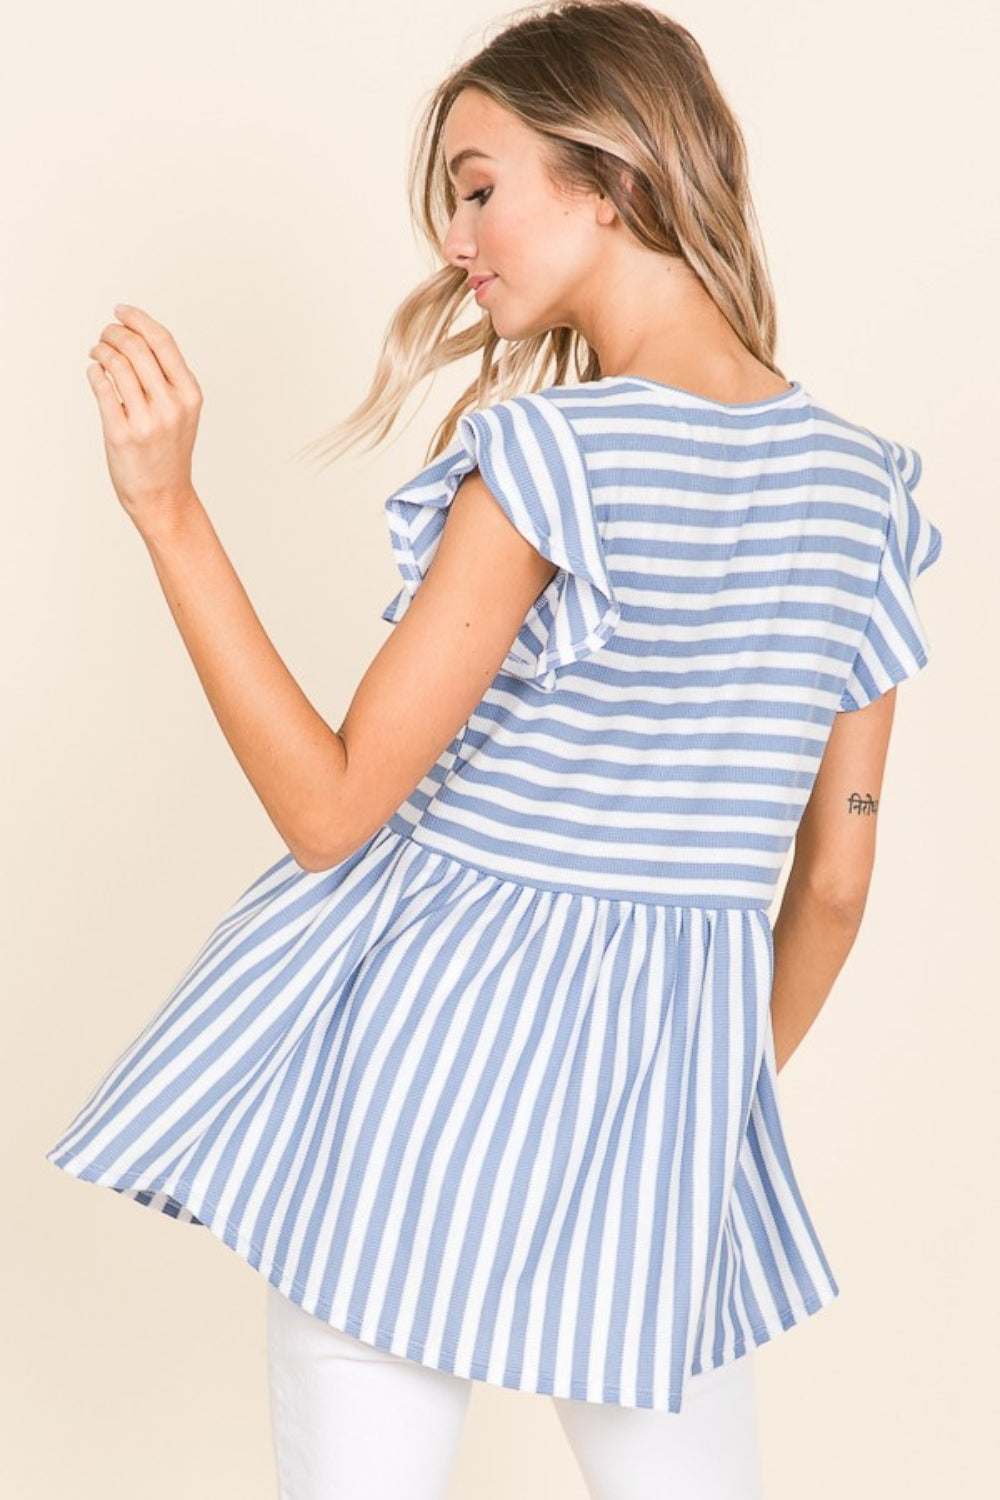 BOMBOM Striped Round Neck Blouse-Short Sleeve Tops-Inspired by Justeen-Women's Clothing Boutique in Chicago, Illinois